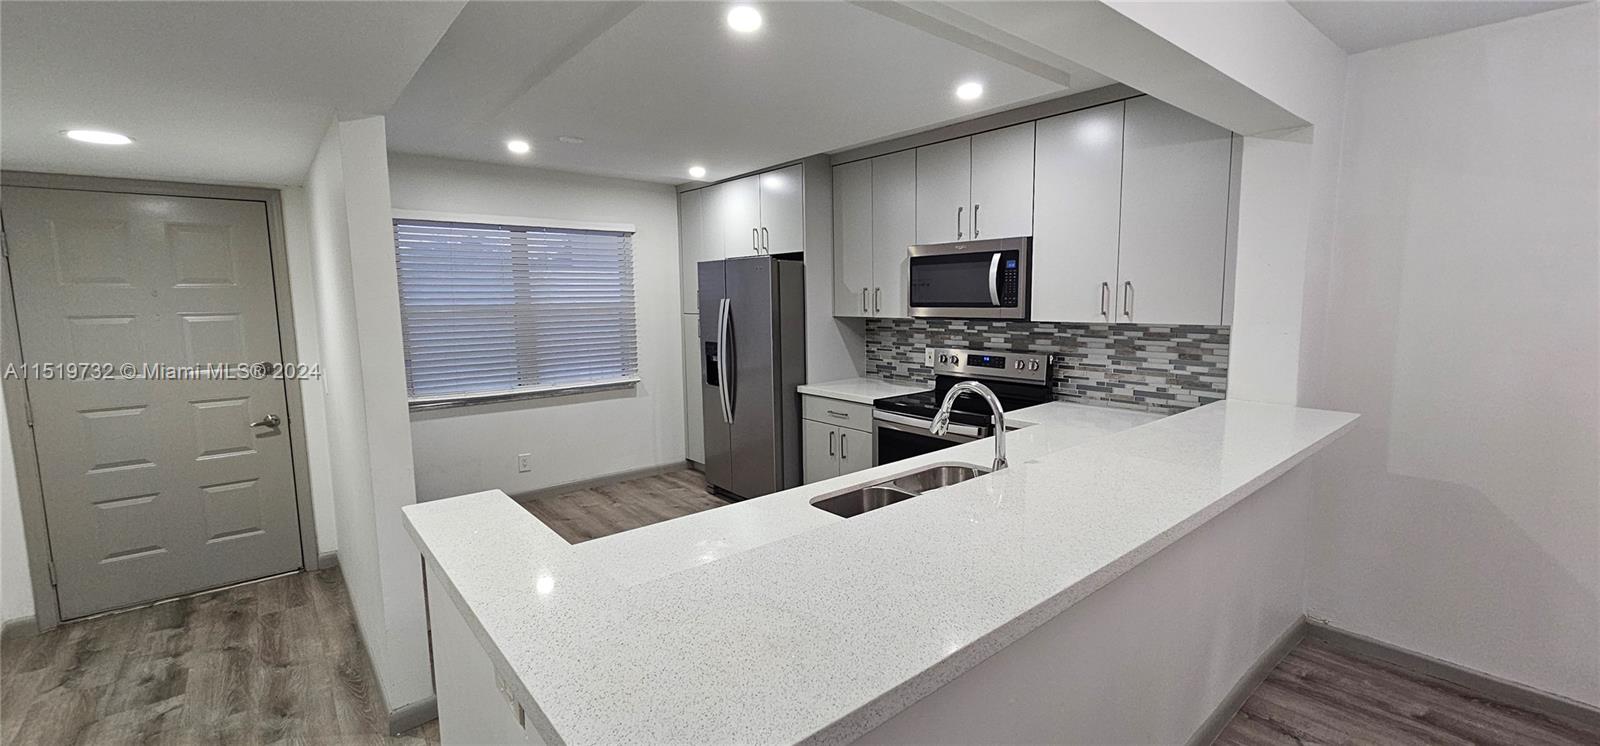 a kitchen with kitchen island a sink stainless steel appliances and counter space